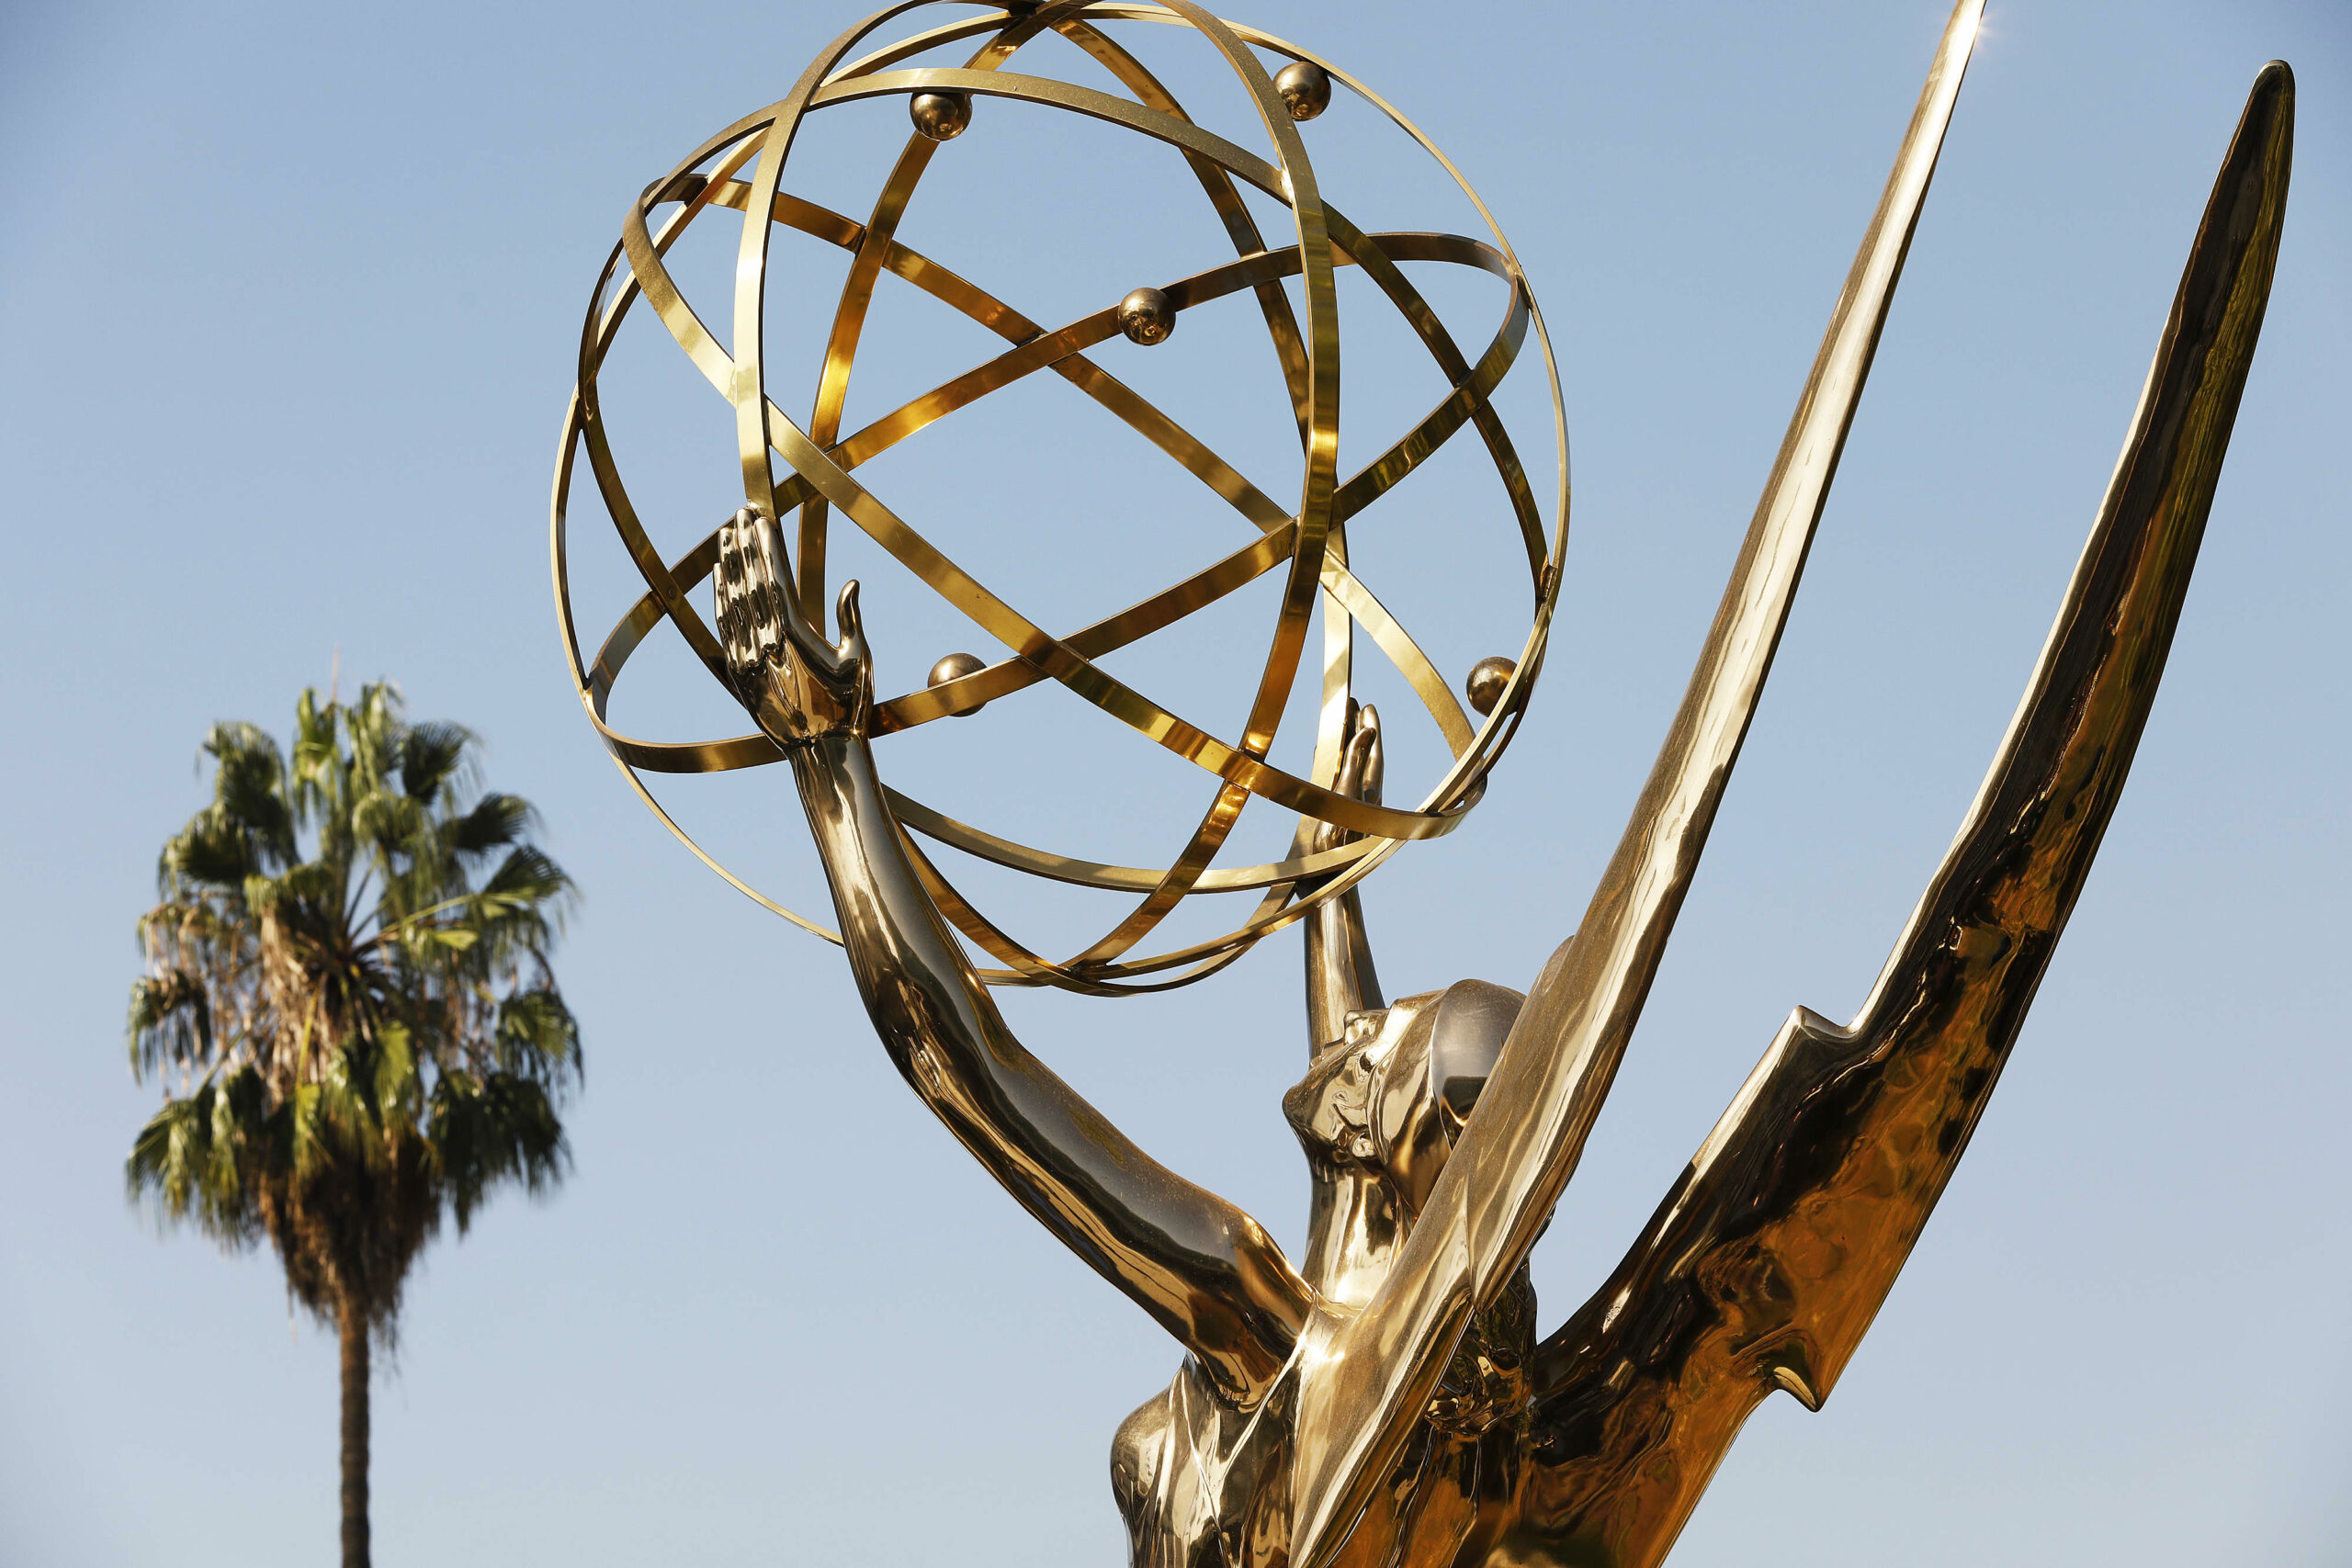 Emmy ratings bounce back from all-time low last year